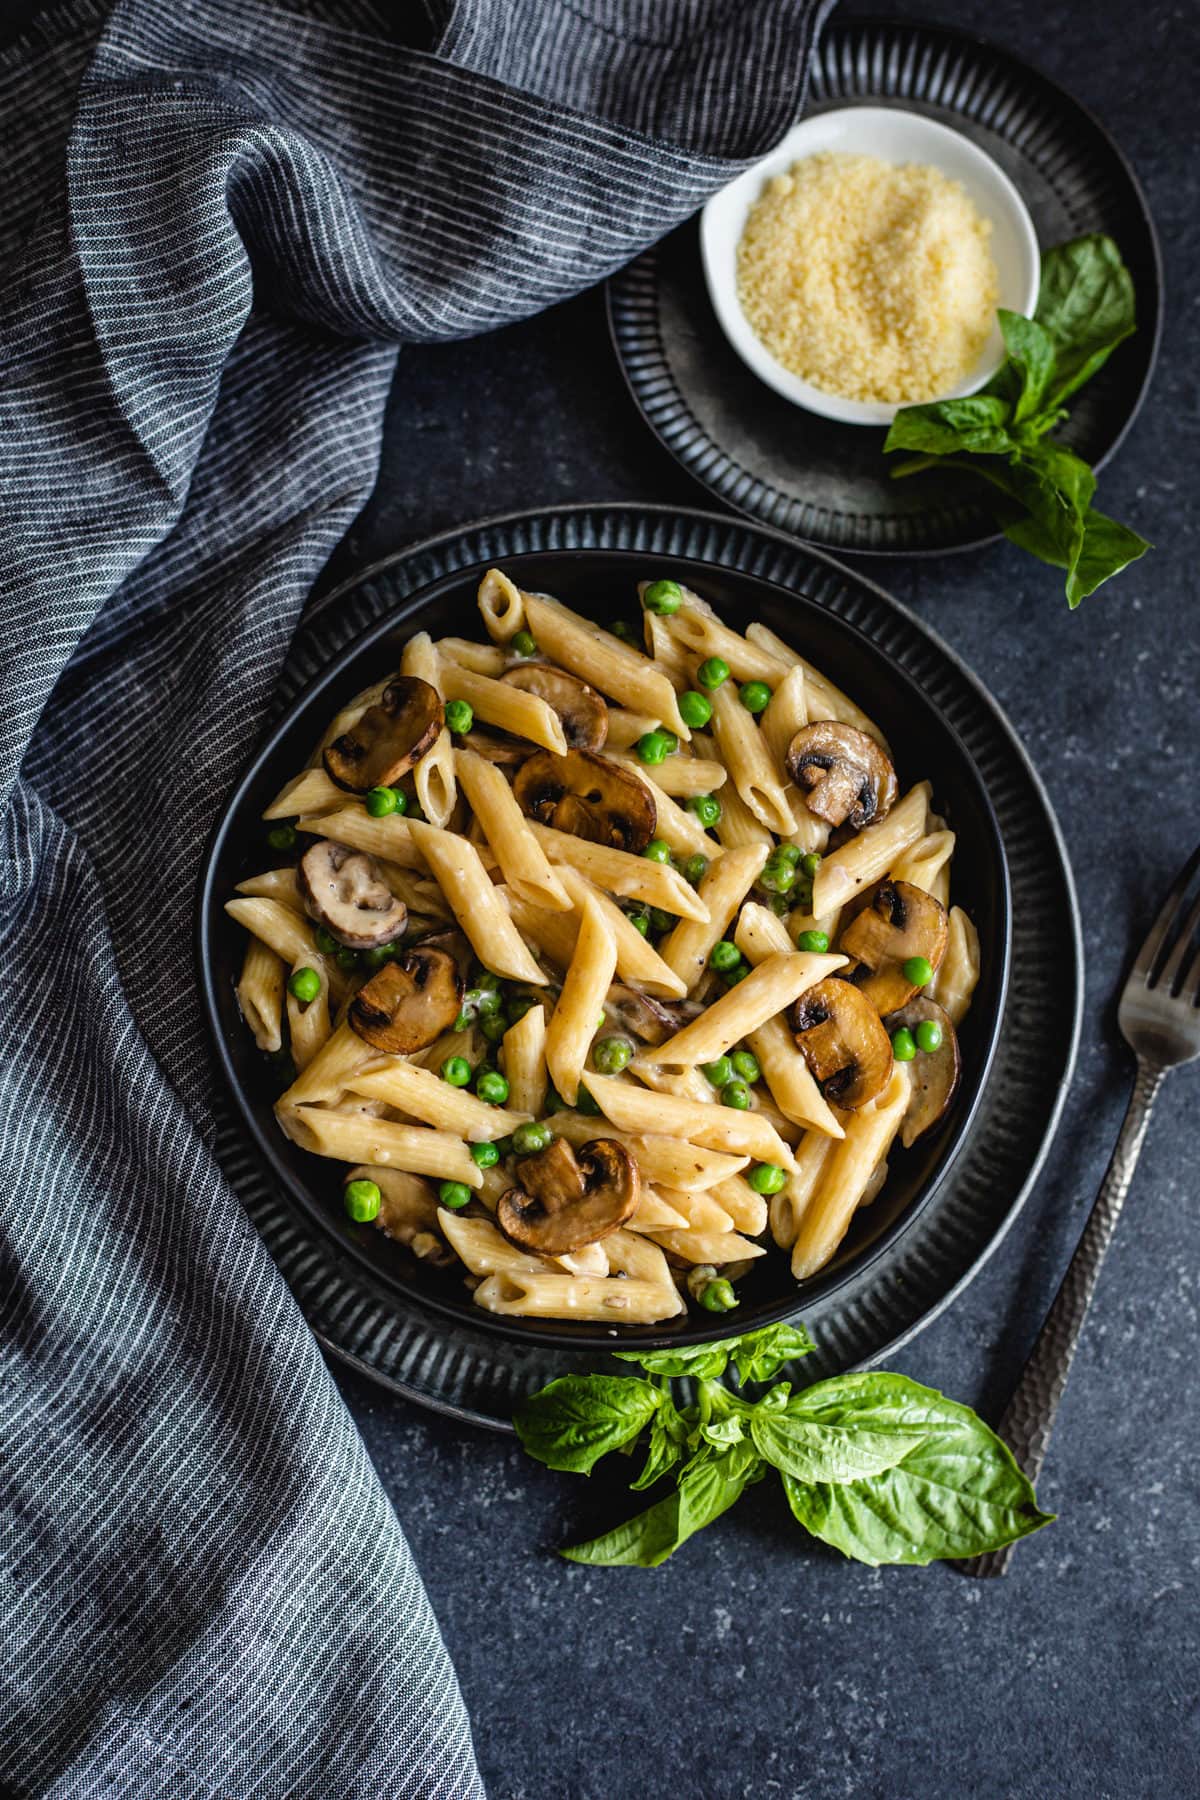 creamy mushroom pasta recipe in black bowl with grated cheese and fresh basil